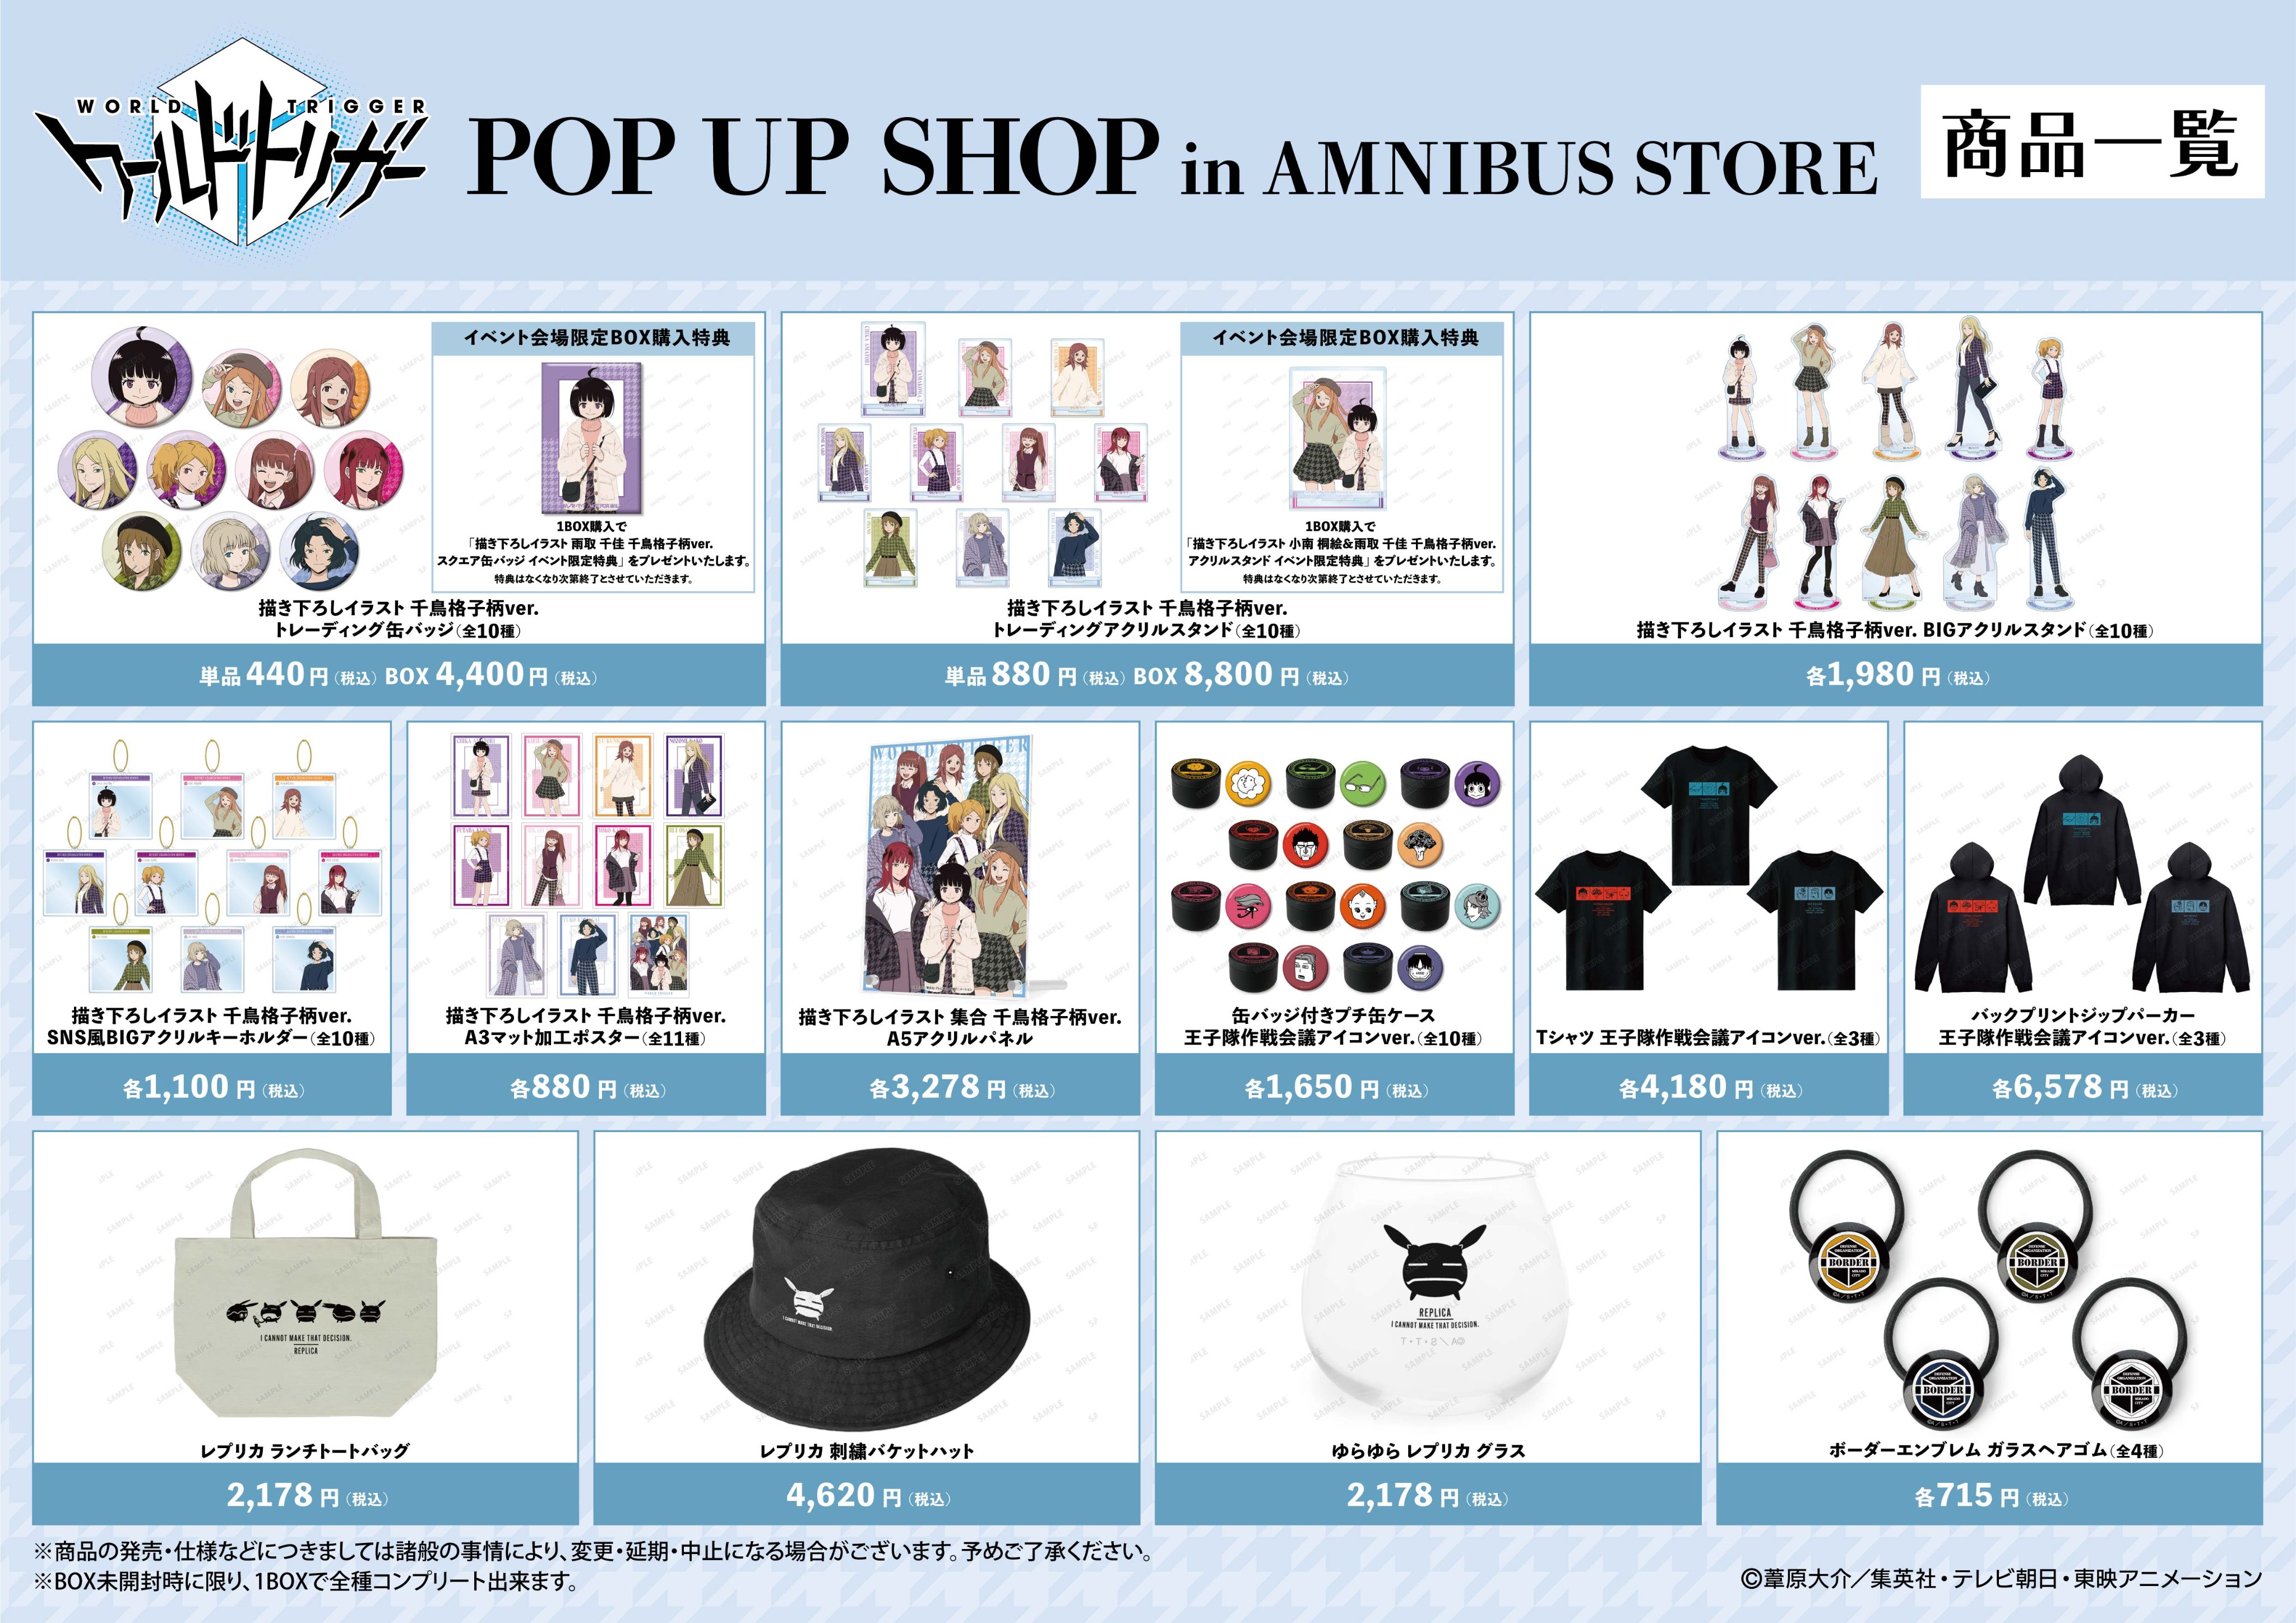 POP UP SHOP in AMNIBUS STORE coming 17th February. I want more World Trigger  female characters merch ヽ(♡‿♡)ノ : r/worldtrigger